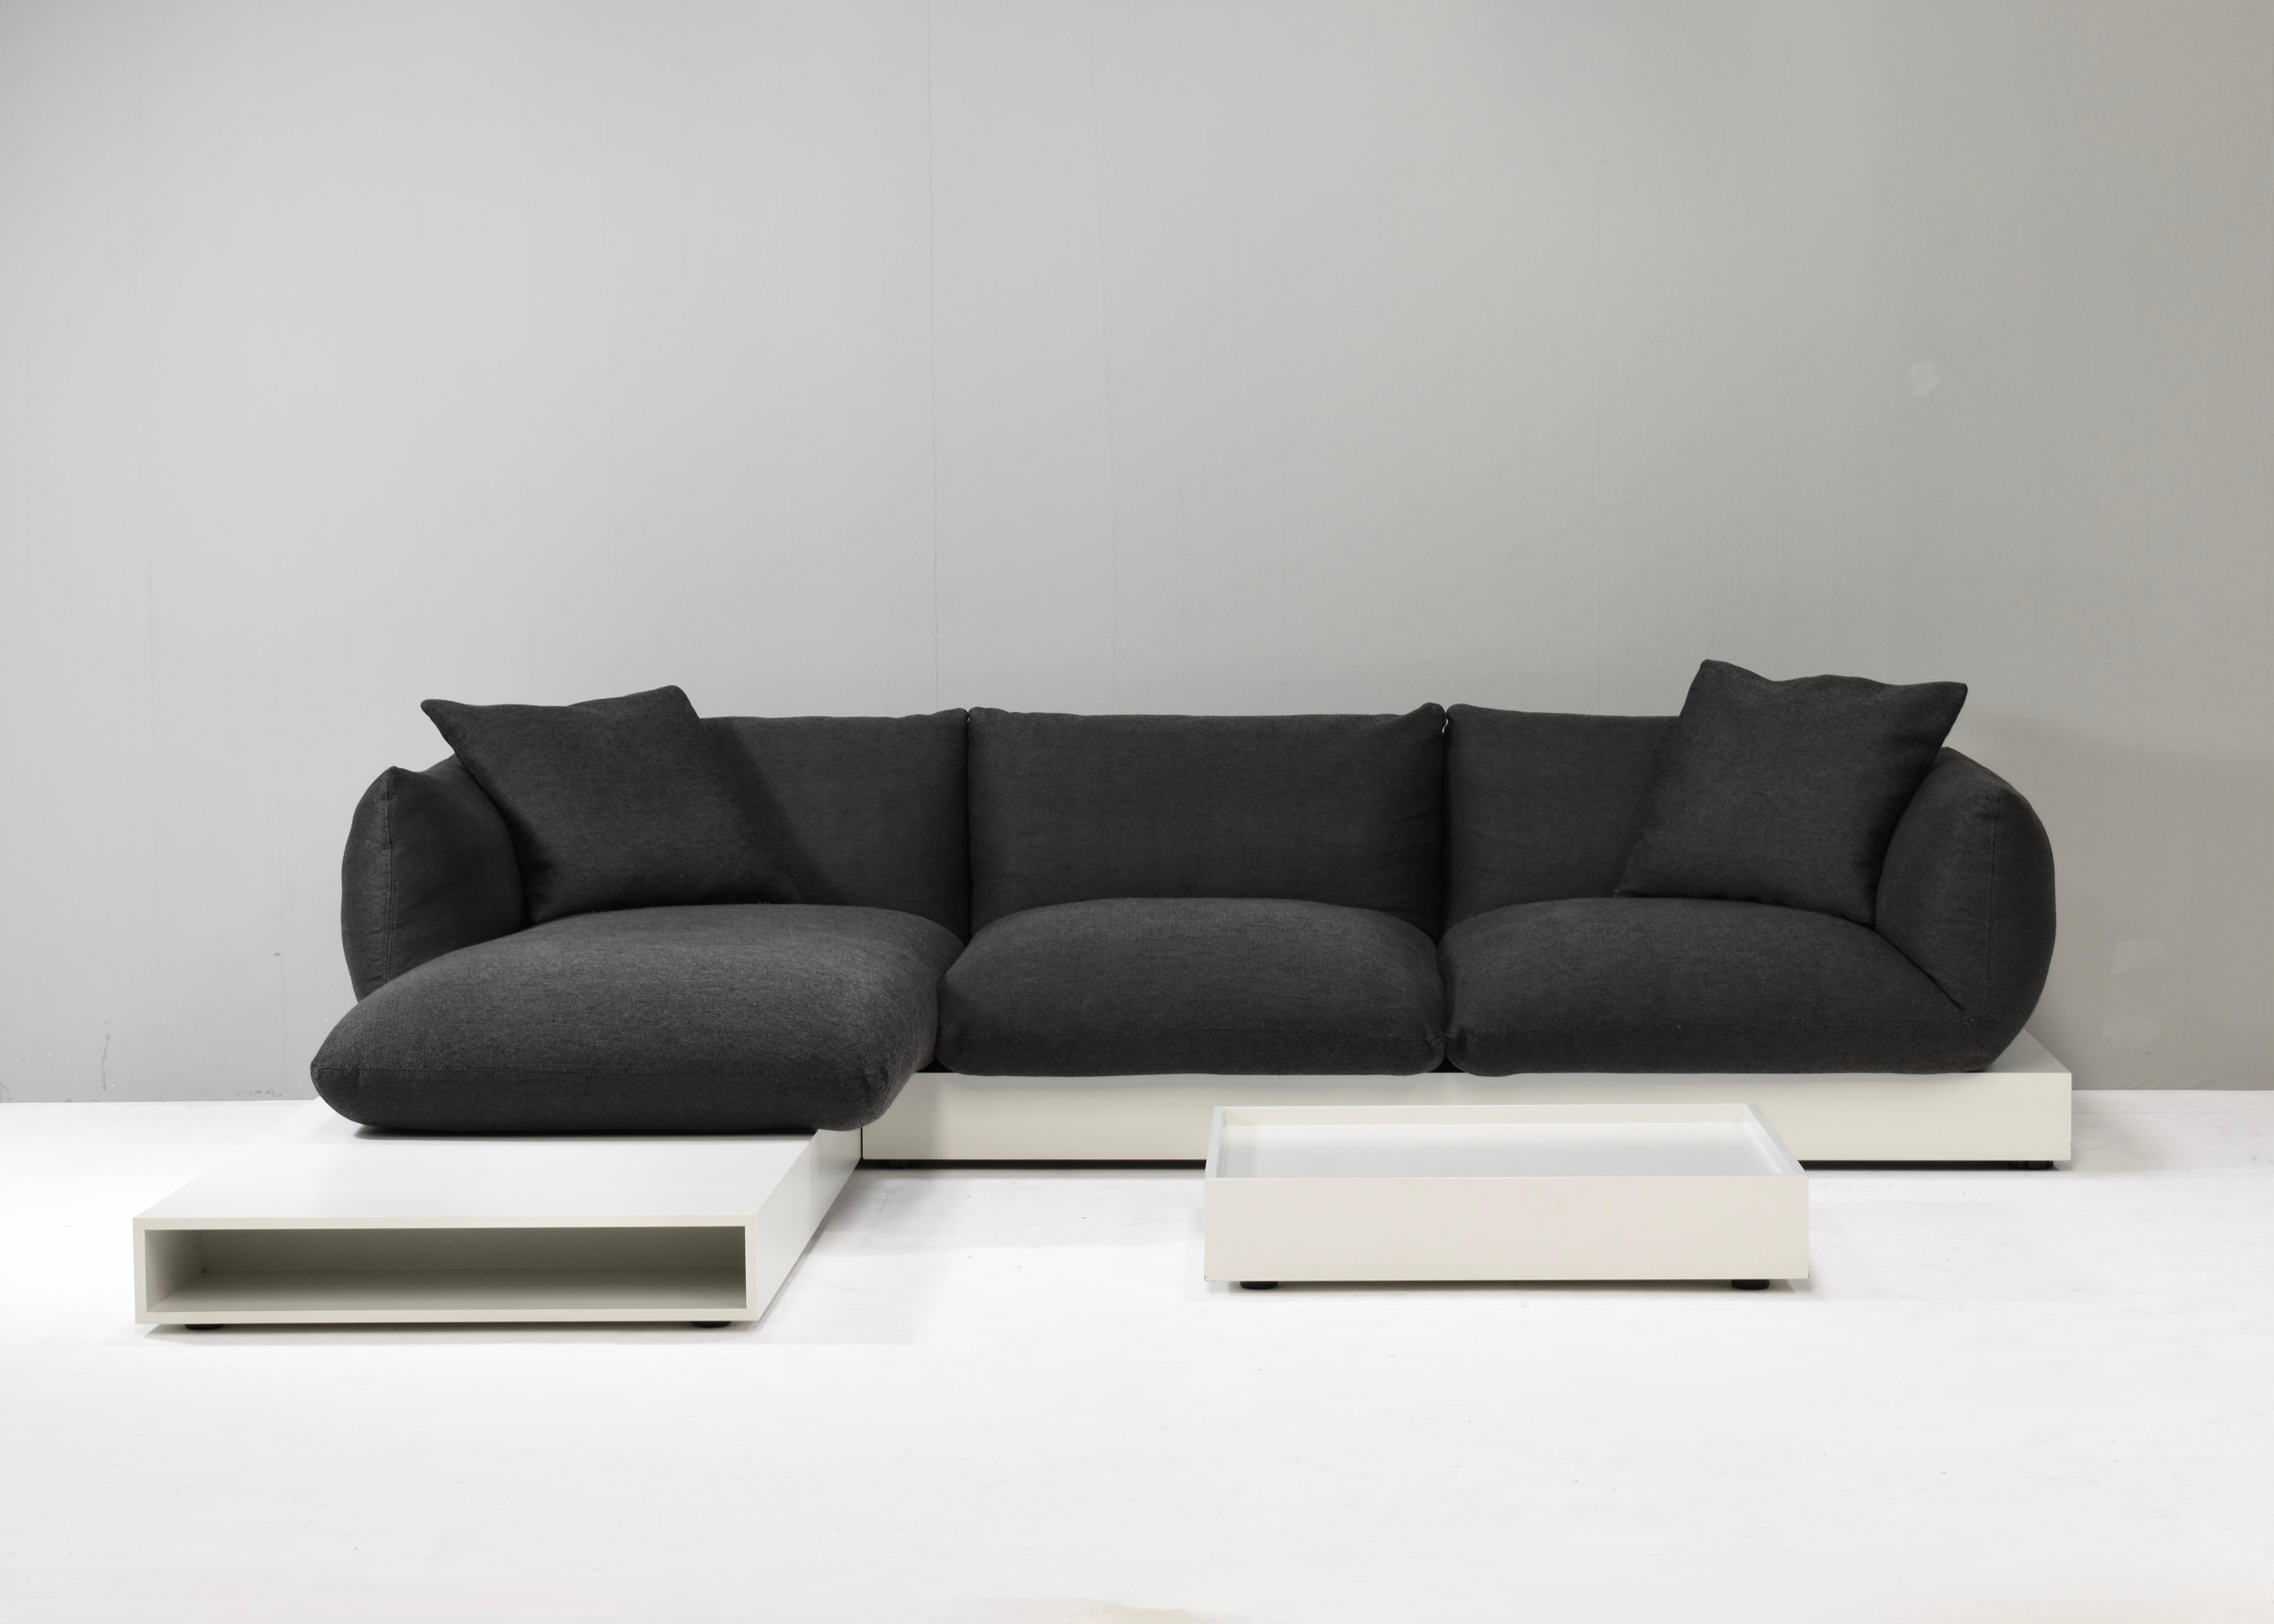 Fabric Original COR JALIS Sofa by Jehs & Laub with wood base and coffee table, Germany  For Sale